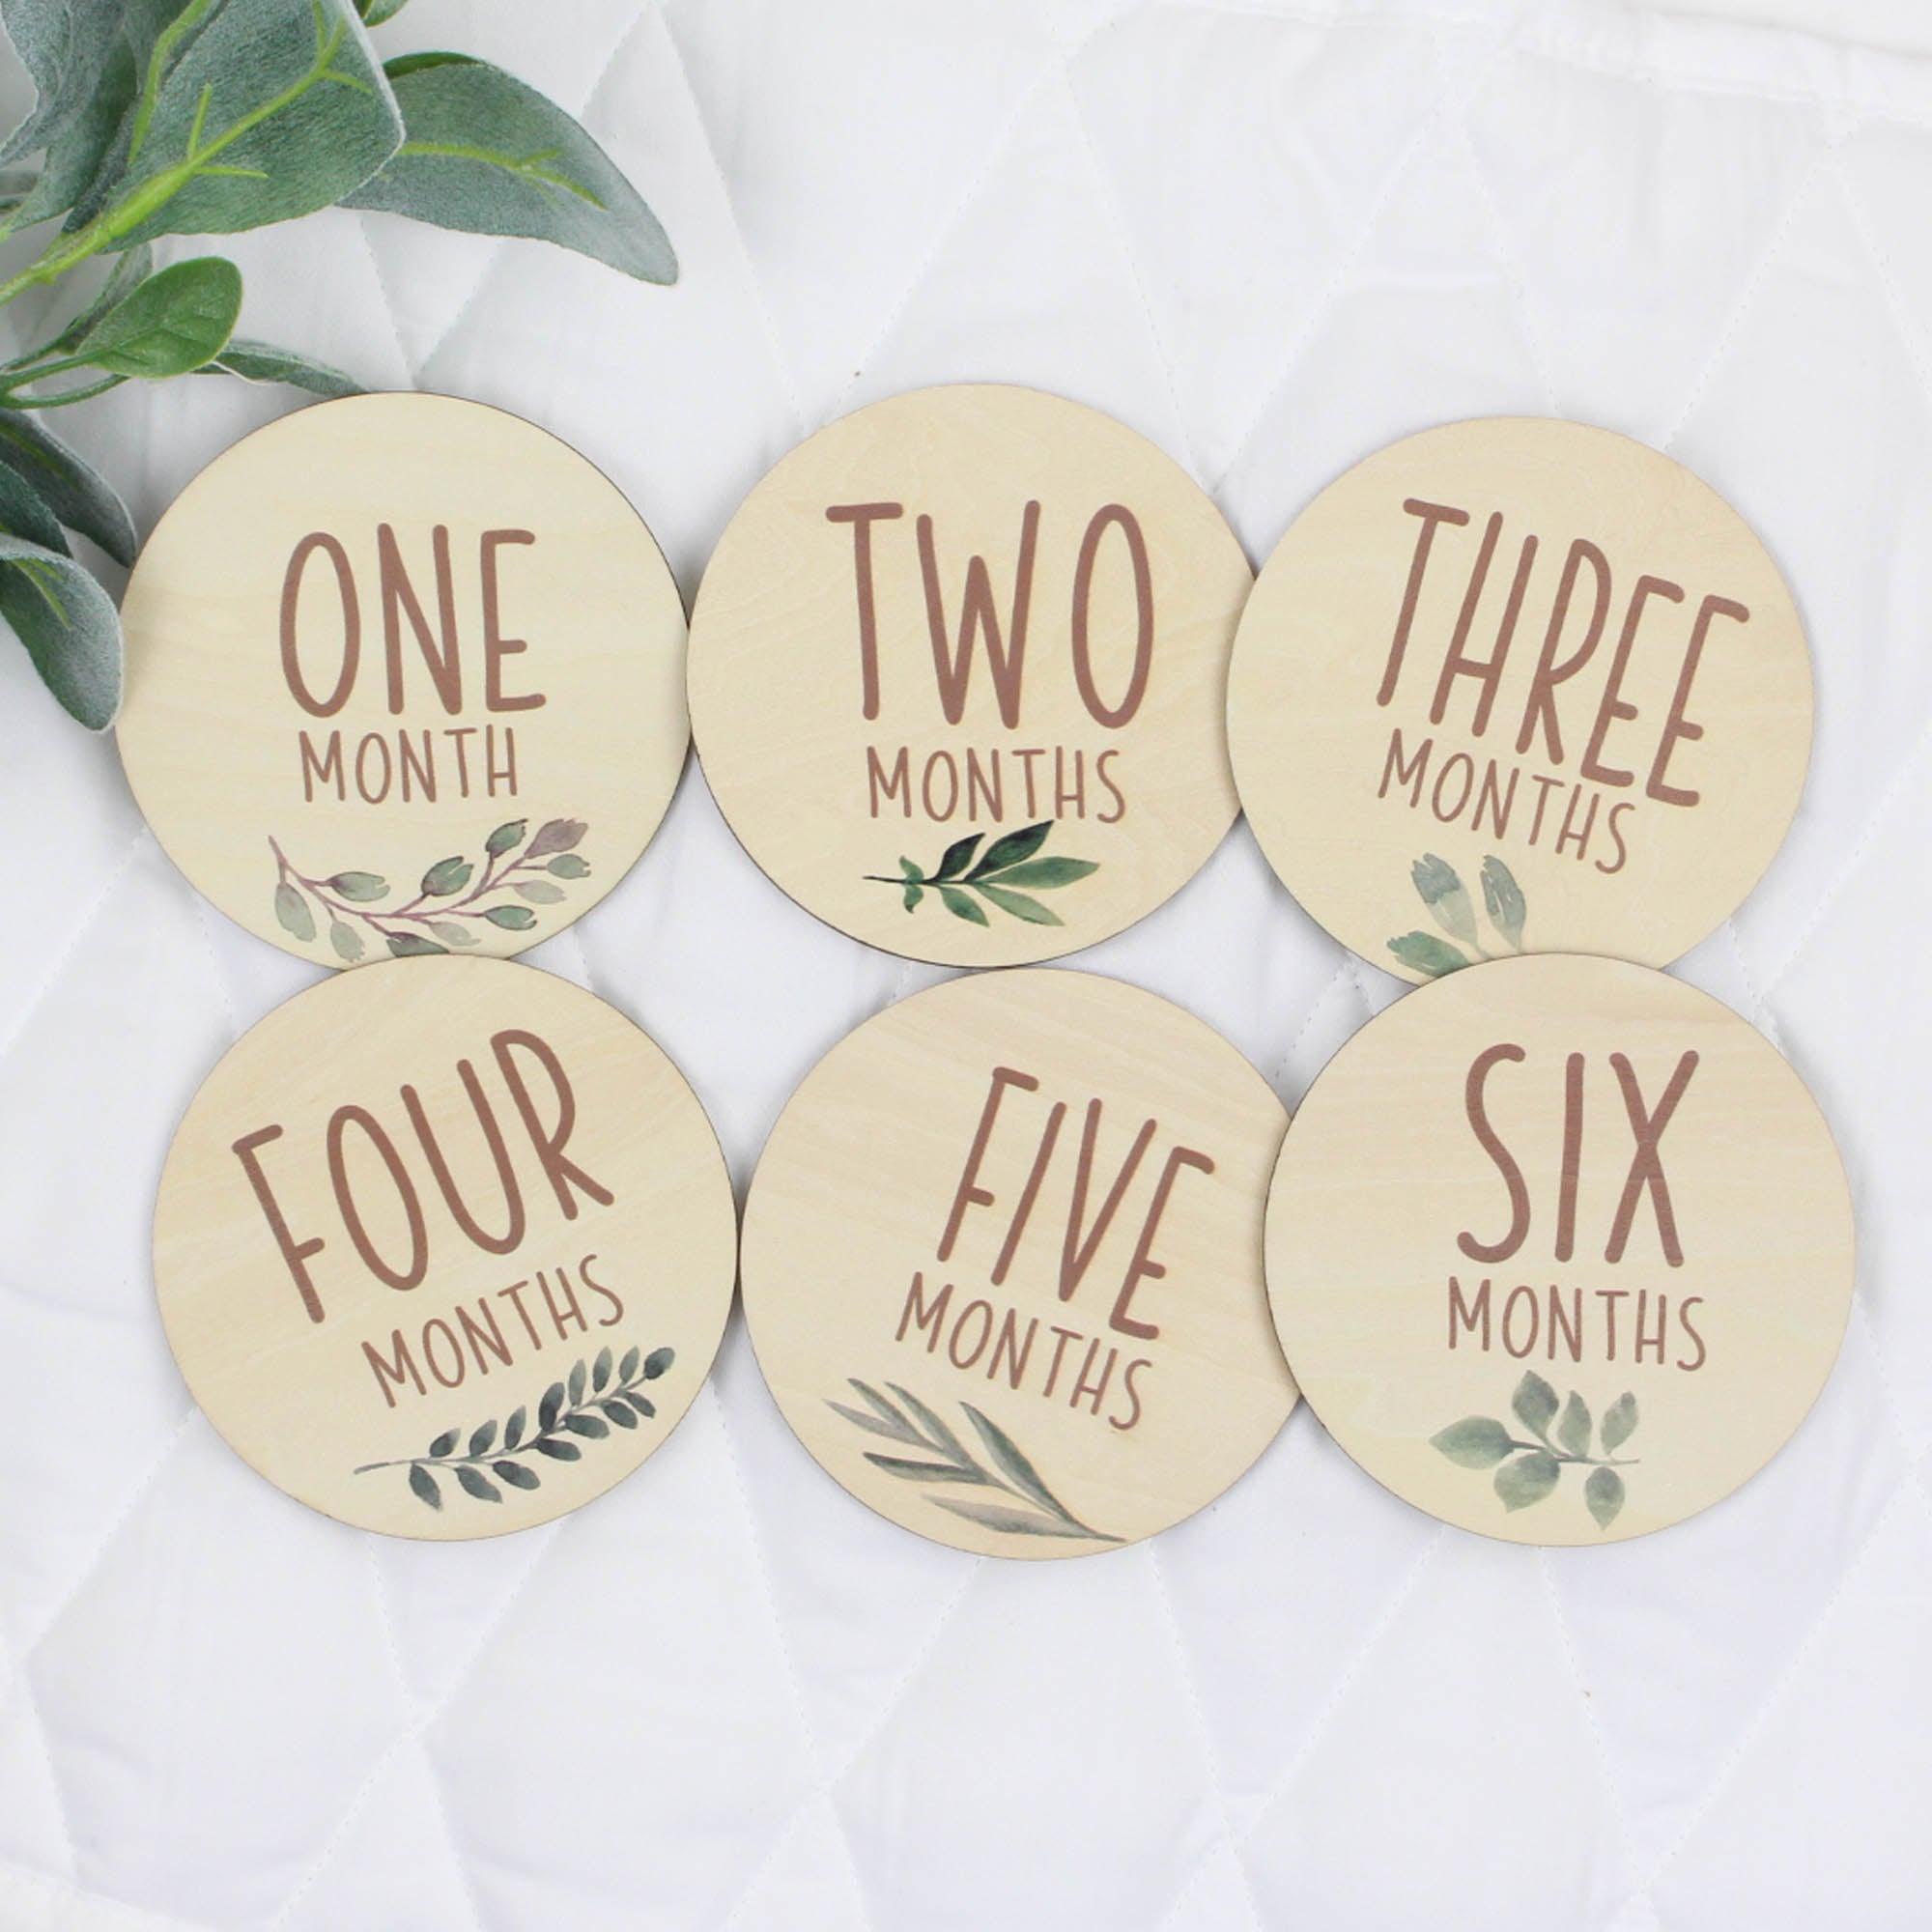 Six double-sided milestone discs from one-month to twelve-months from Birchmark Designs